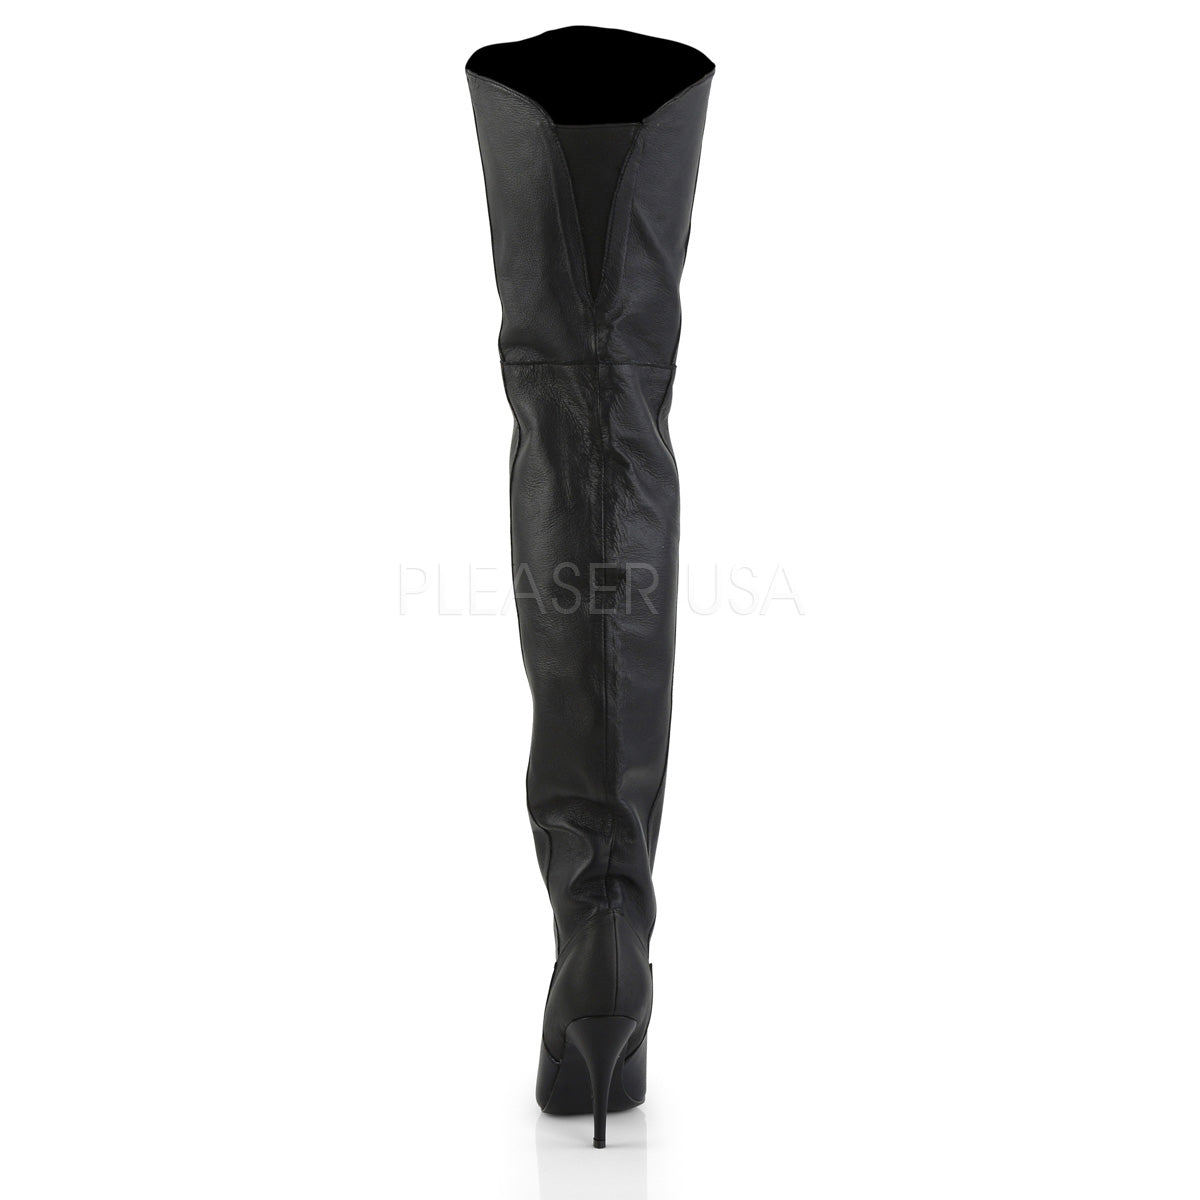 Black Leather Thigh High Boots